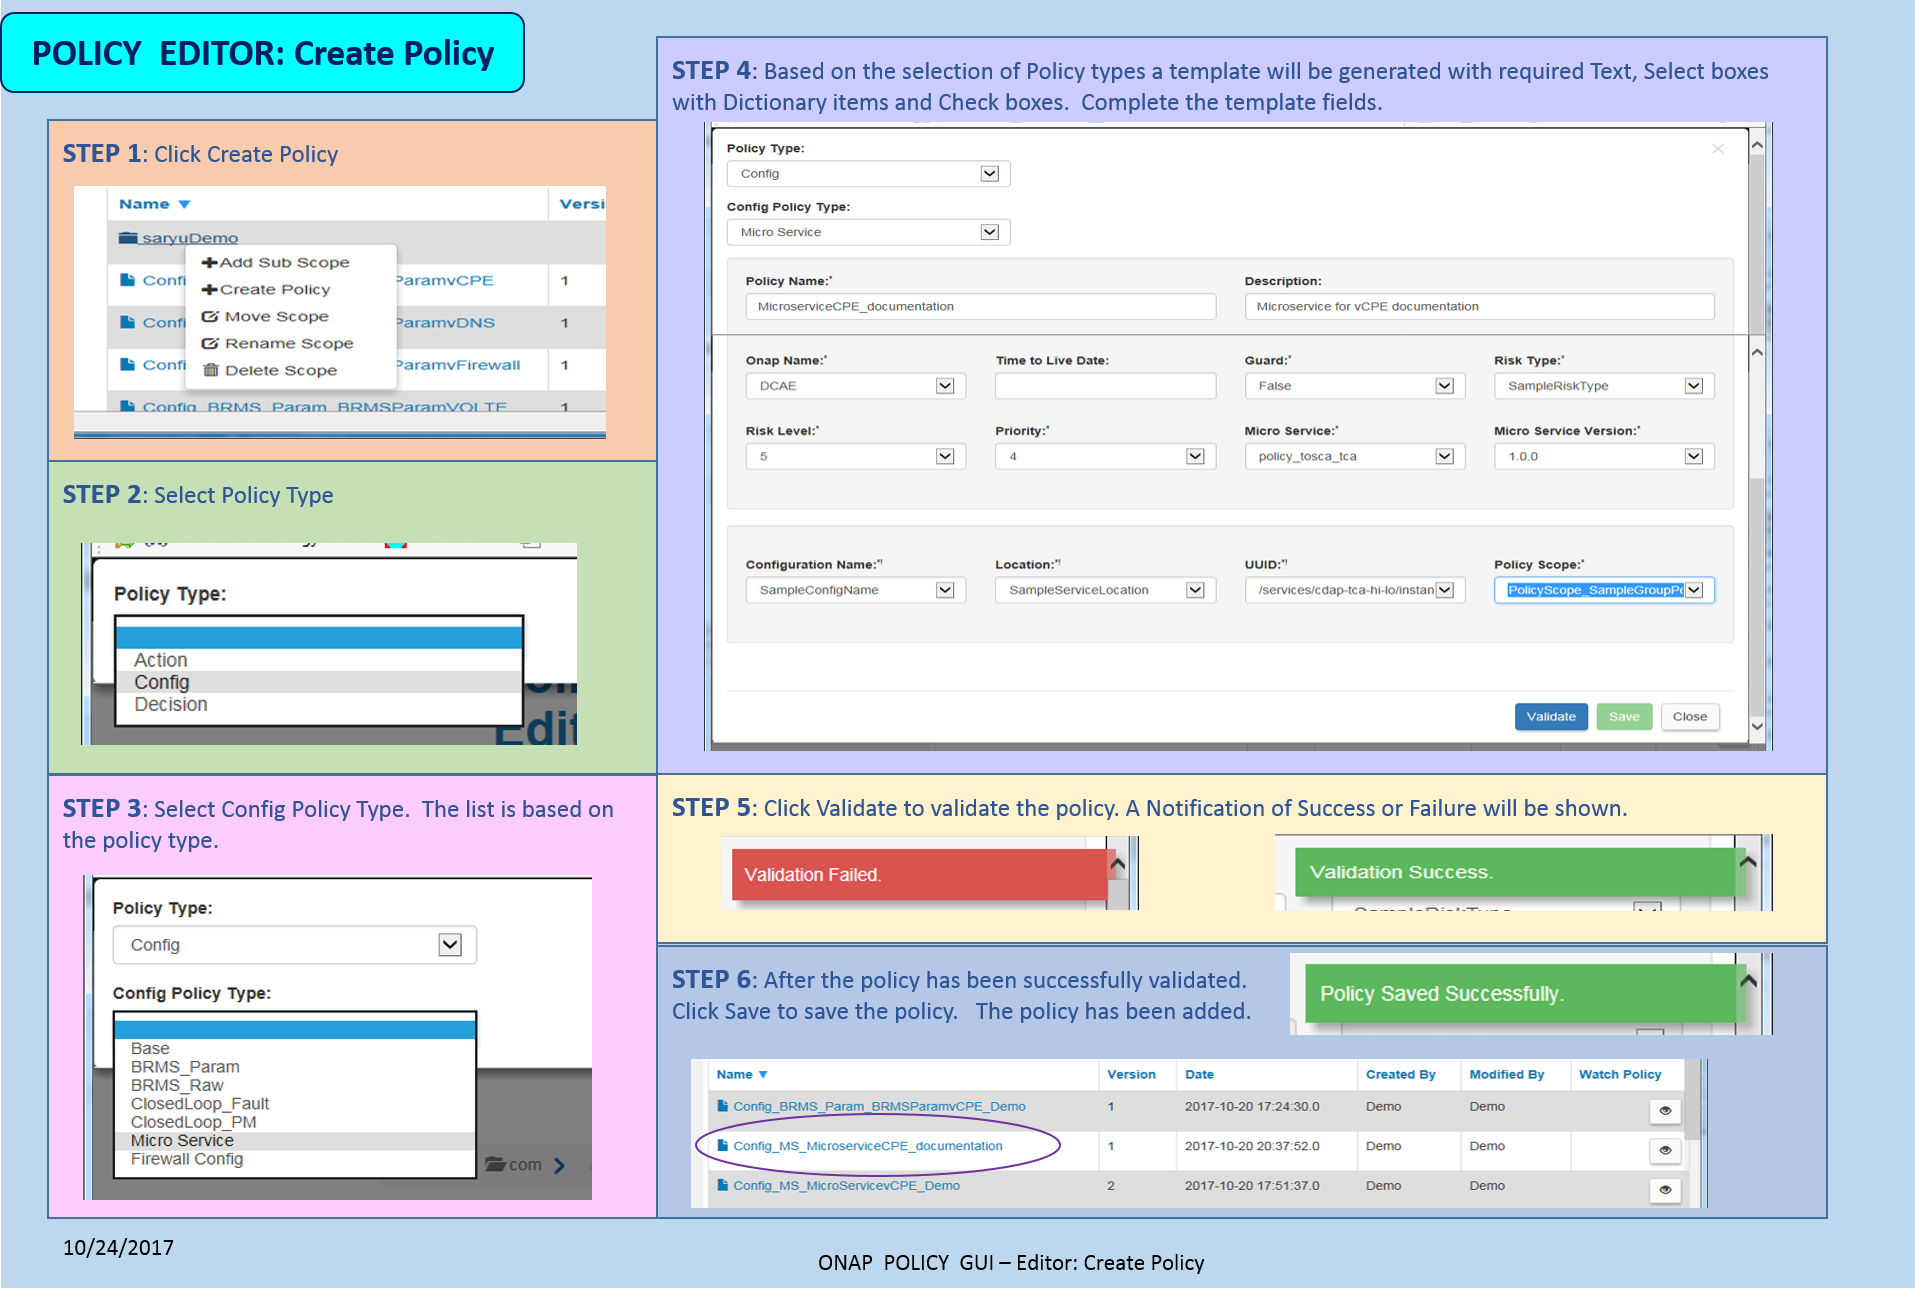 ../_images/PolicyGUI_Editor_CreatePolicy.png